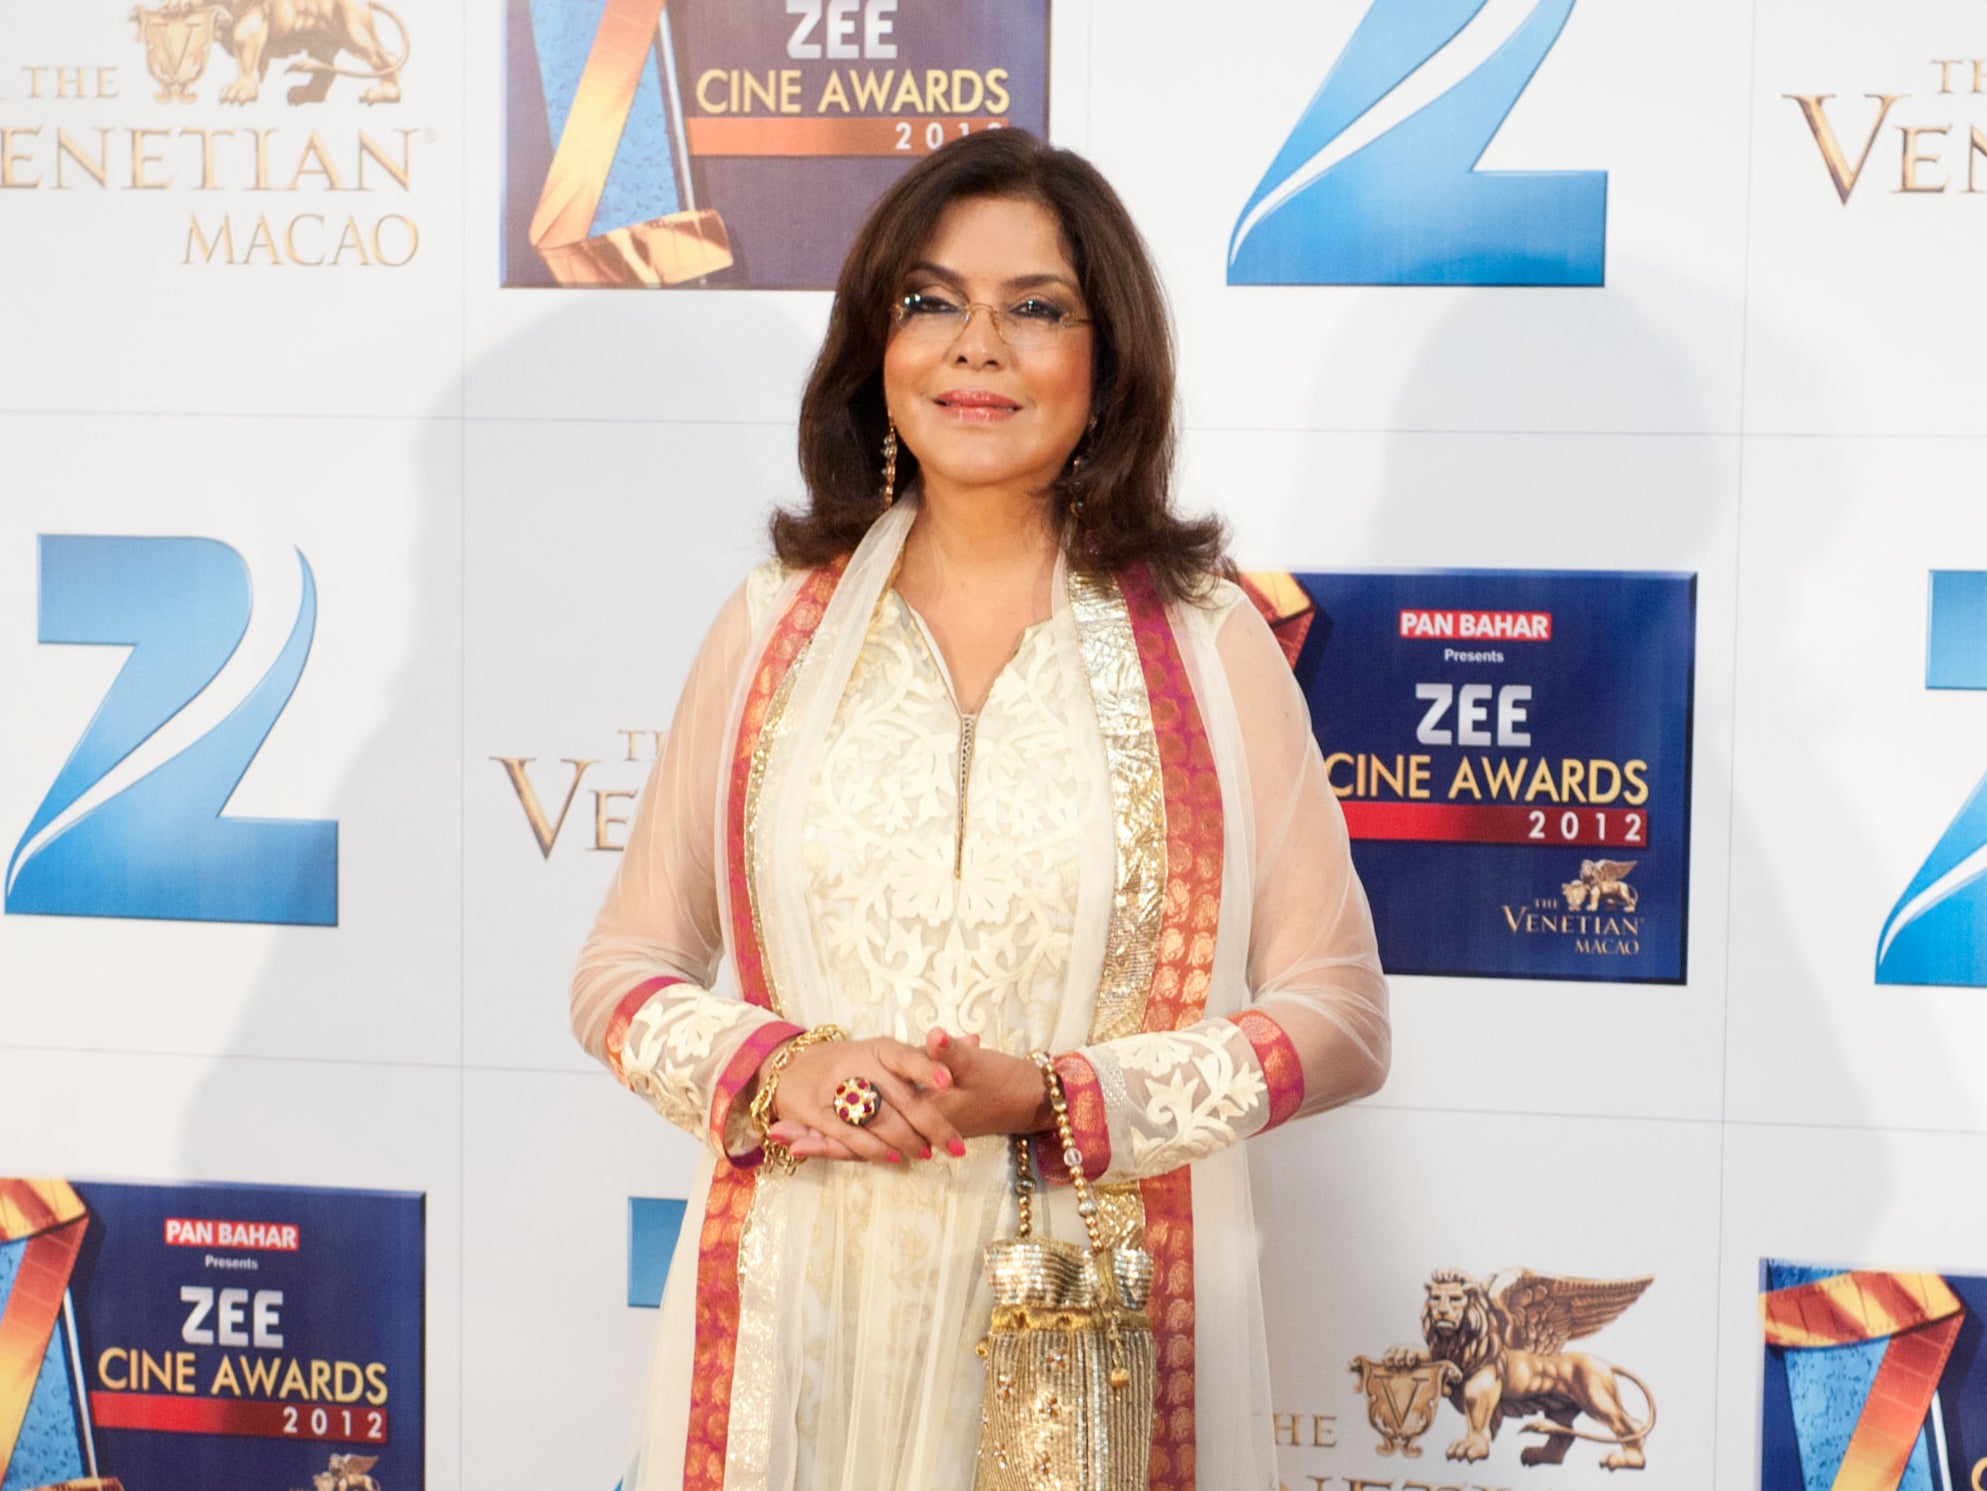 Indian Bollywood actress Zeenat Aman attends red carpet during the Zee Cine Awards 2012